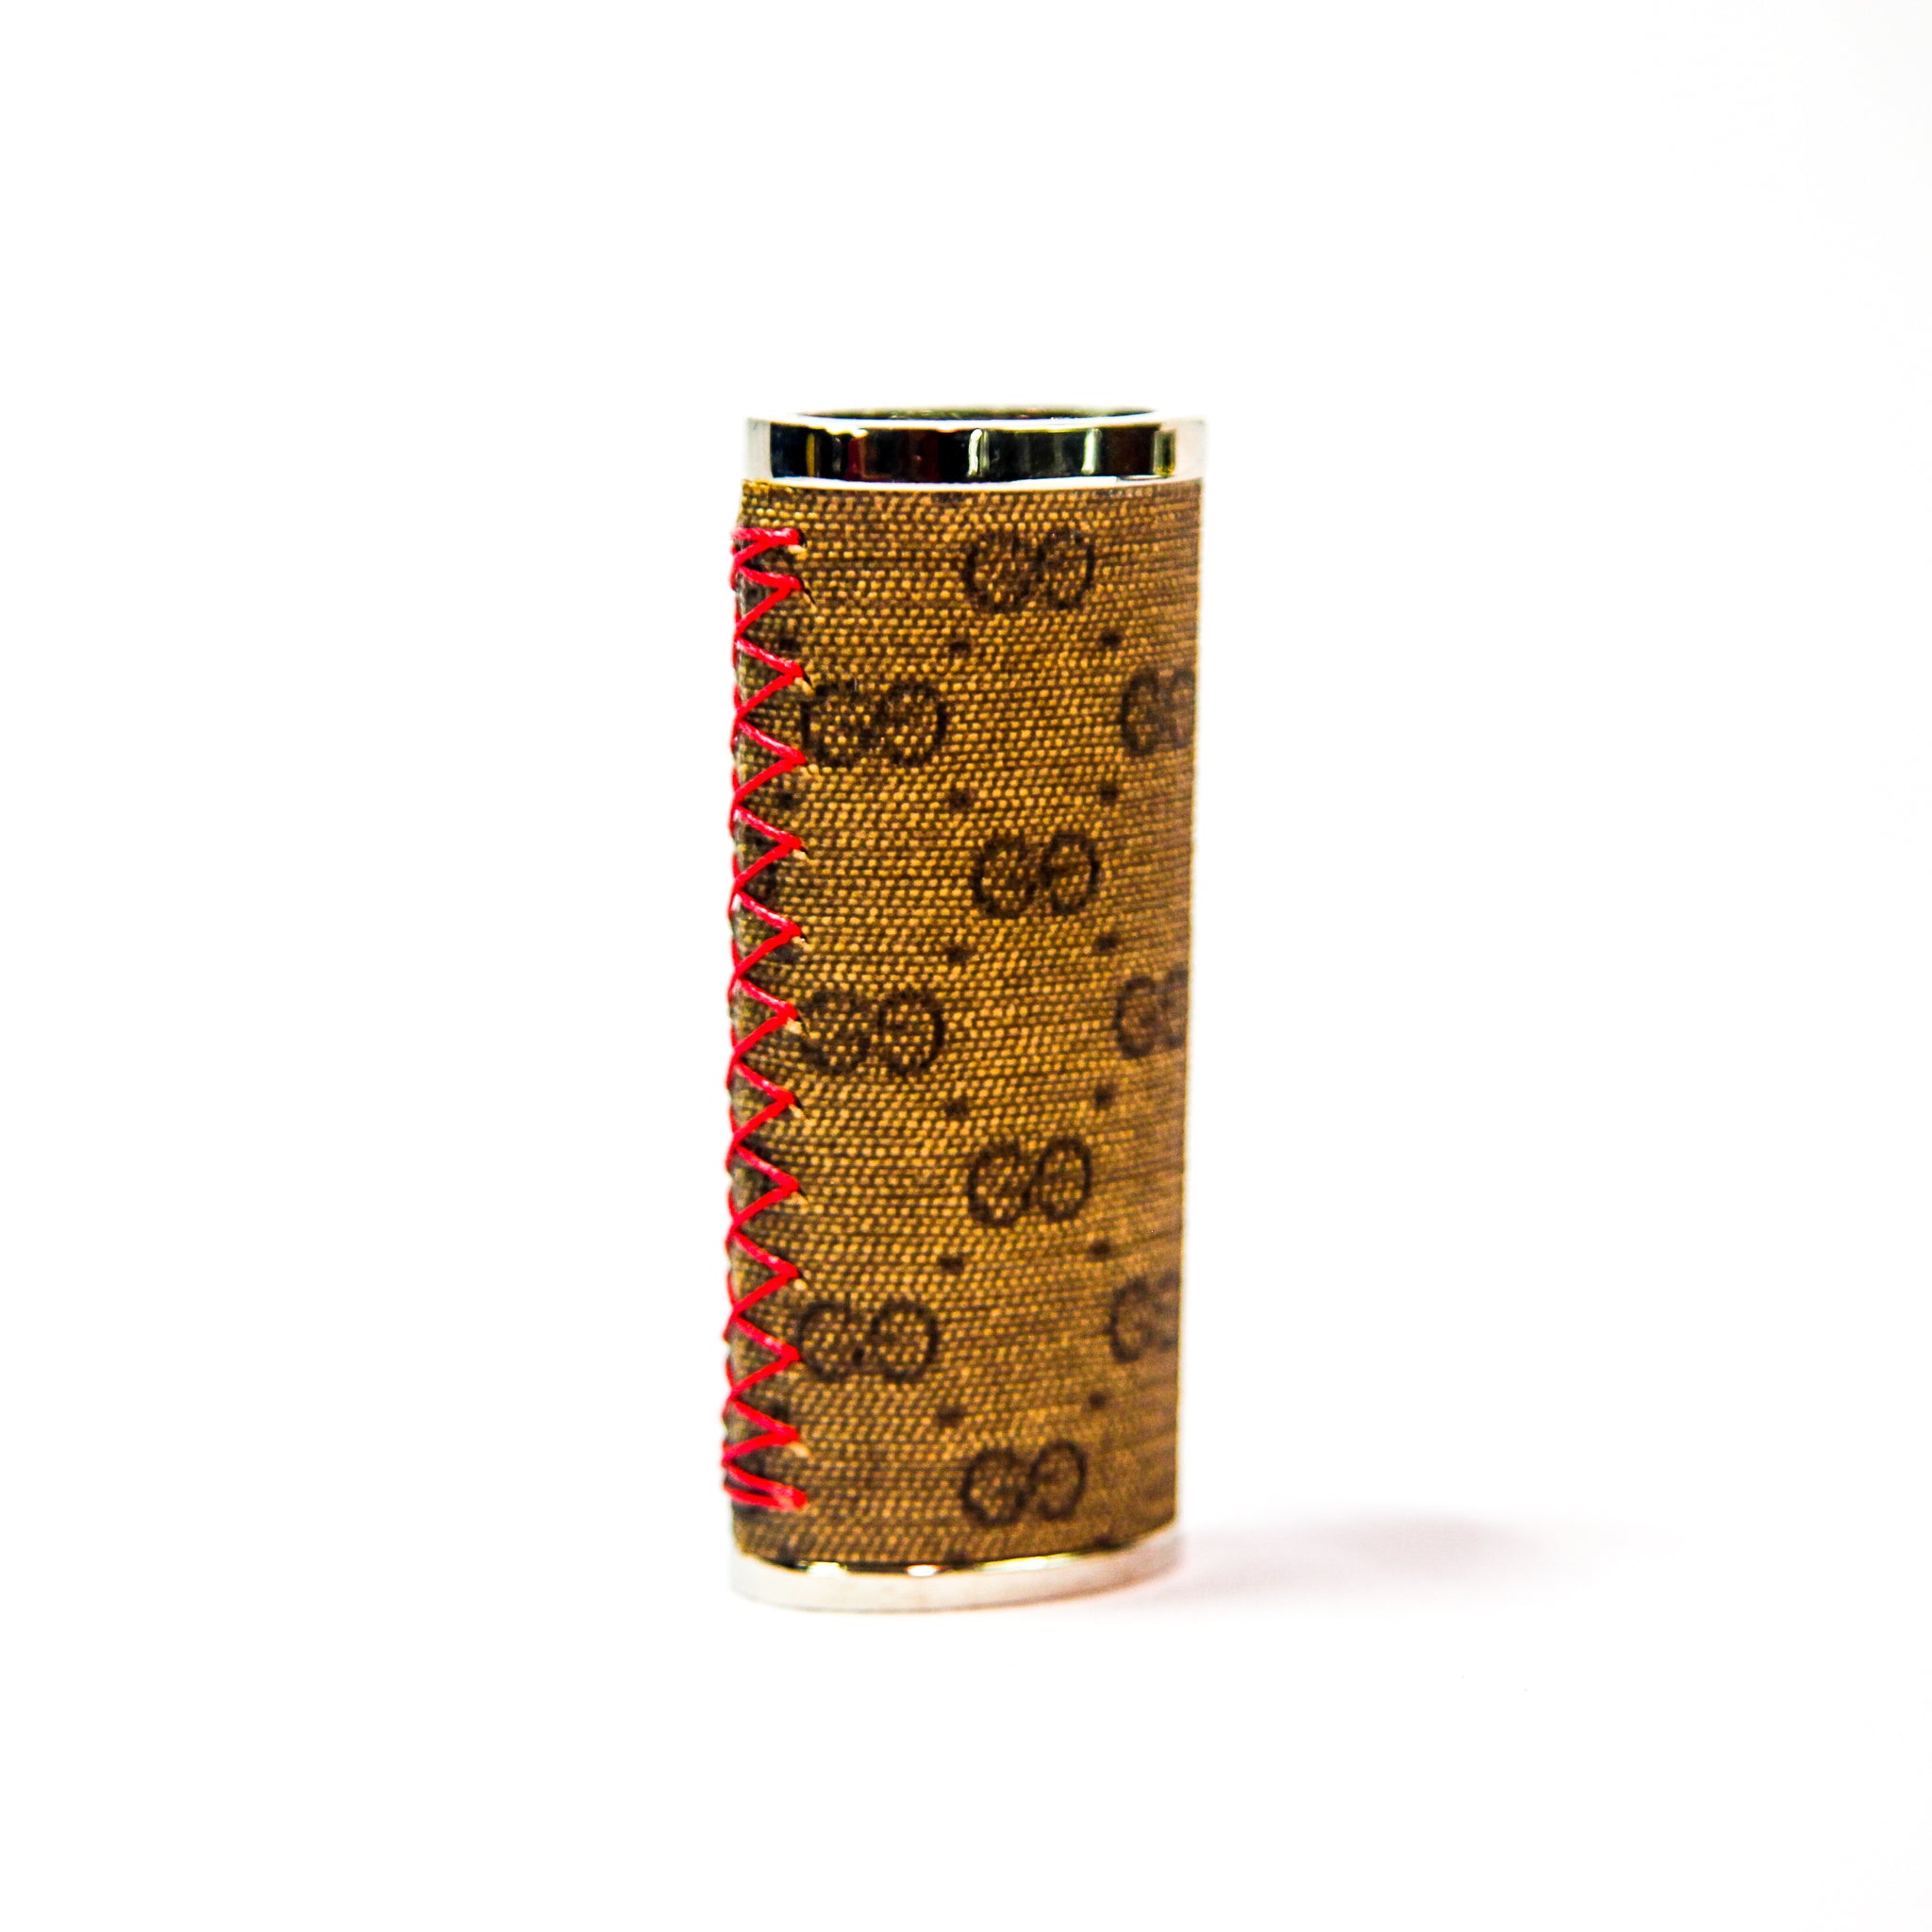 Zoid Luxury Lighter Case - Small Gucci Print in Red – ZAH